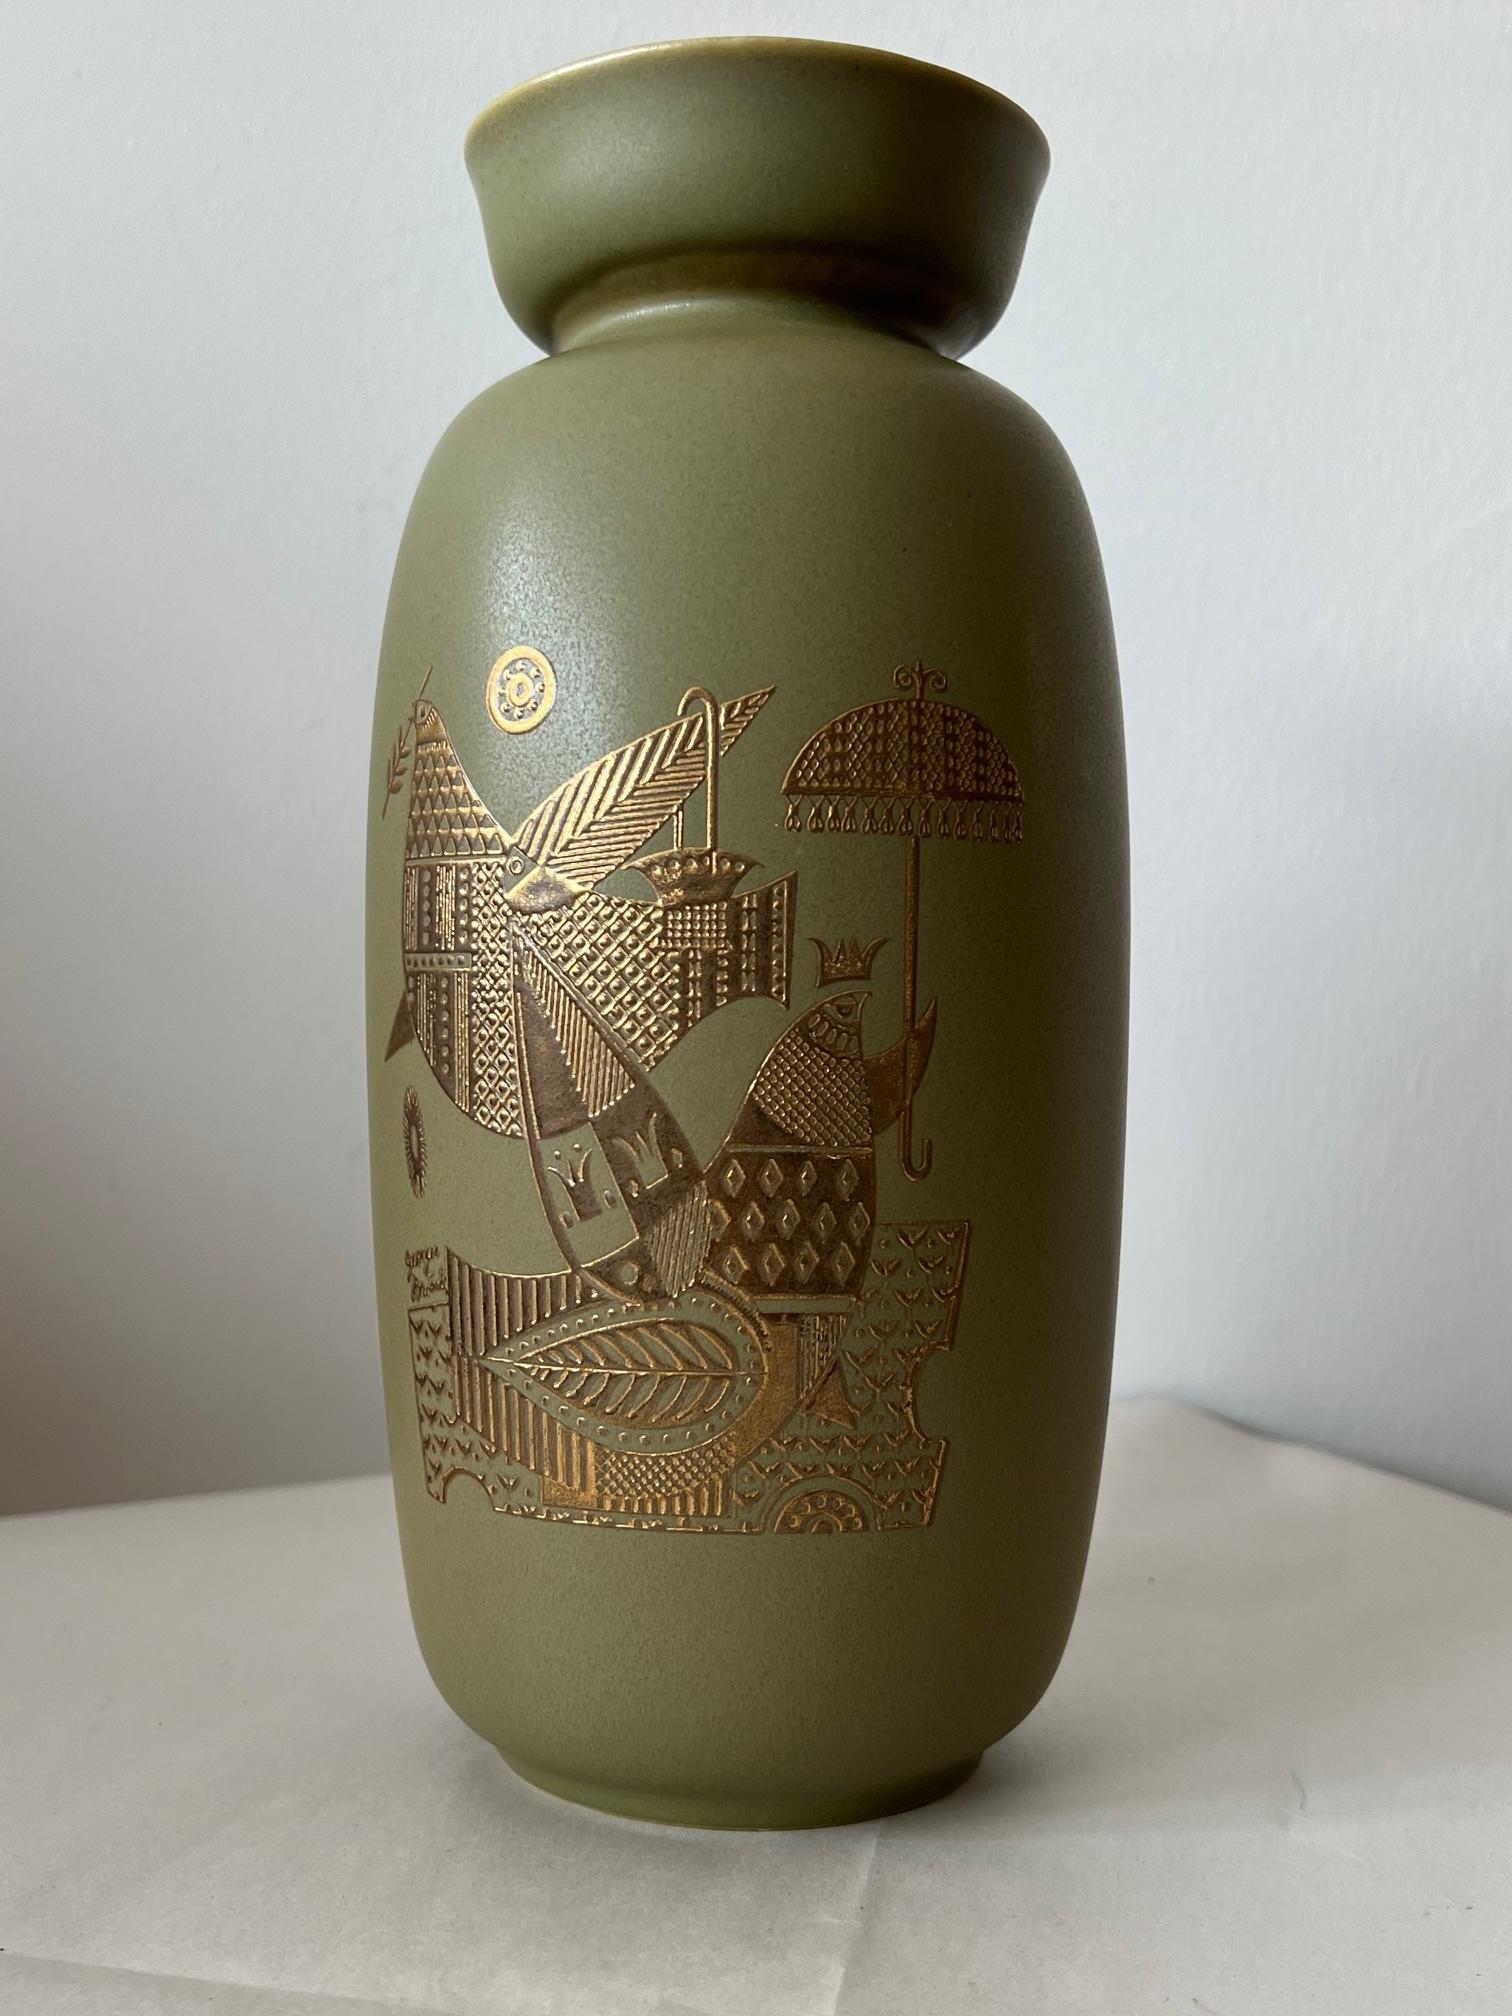  A charming large vase by Georges Briard for Hyalyn, USA, ca' 1960's. Gold on green, signed on the front.